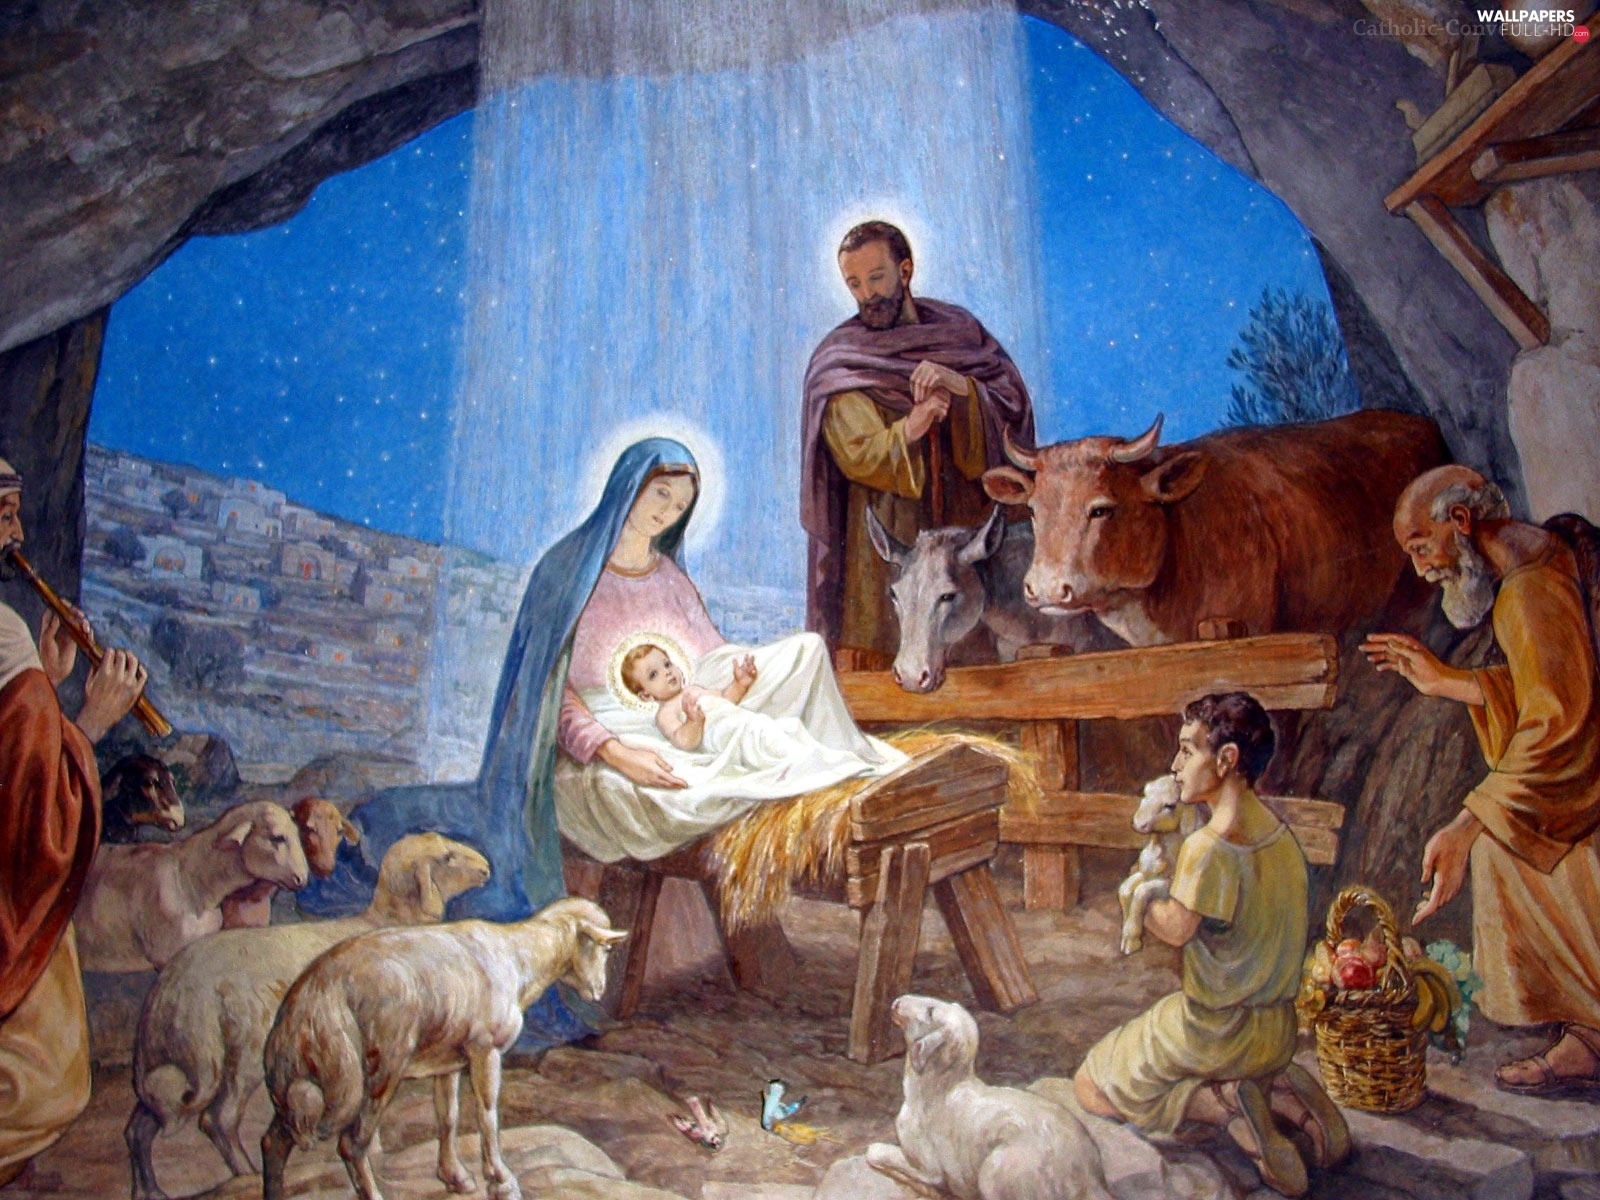 Stable, Jesus, Mary, Joseph - Full HD Wallpapers: 1600x1200